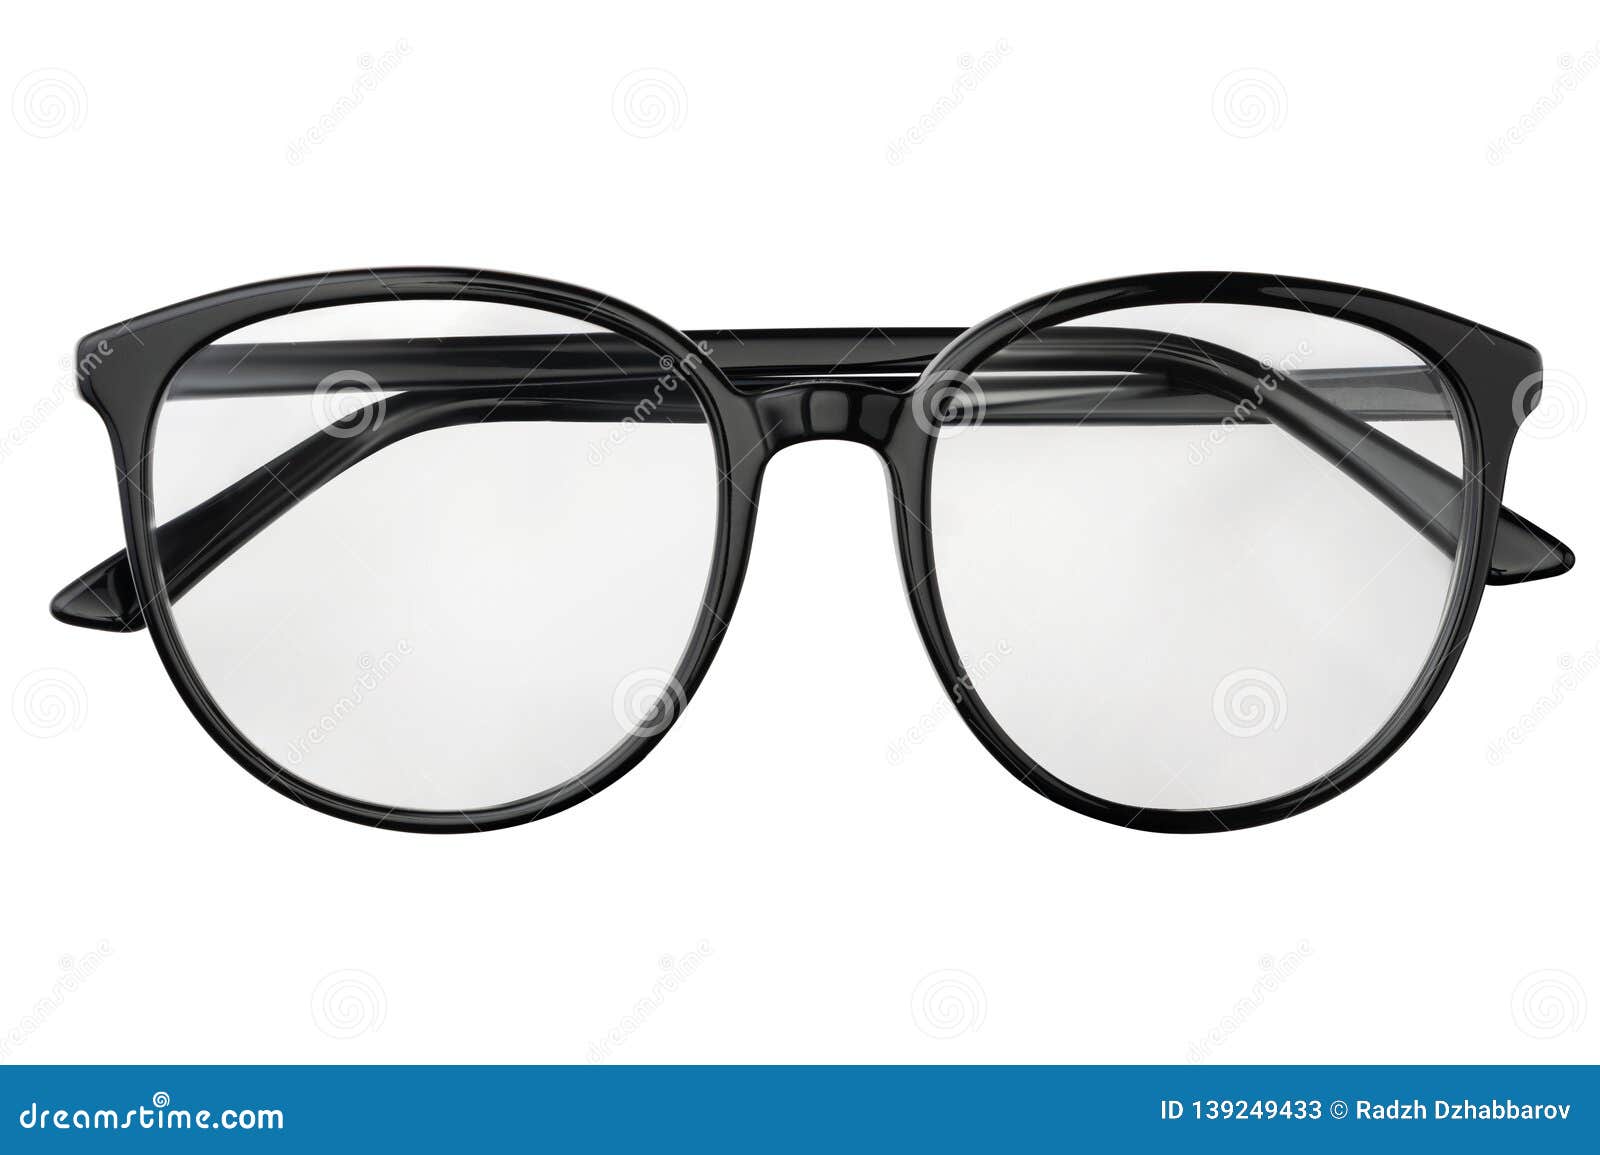 Black Eye Glasses in Round Frame Transparent for Reading or Good Vision,  Top View Isolated on White Background. Glasses Mockup Stock Image - Image  of black, model: 139249433